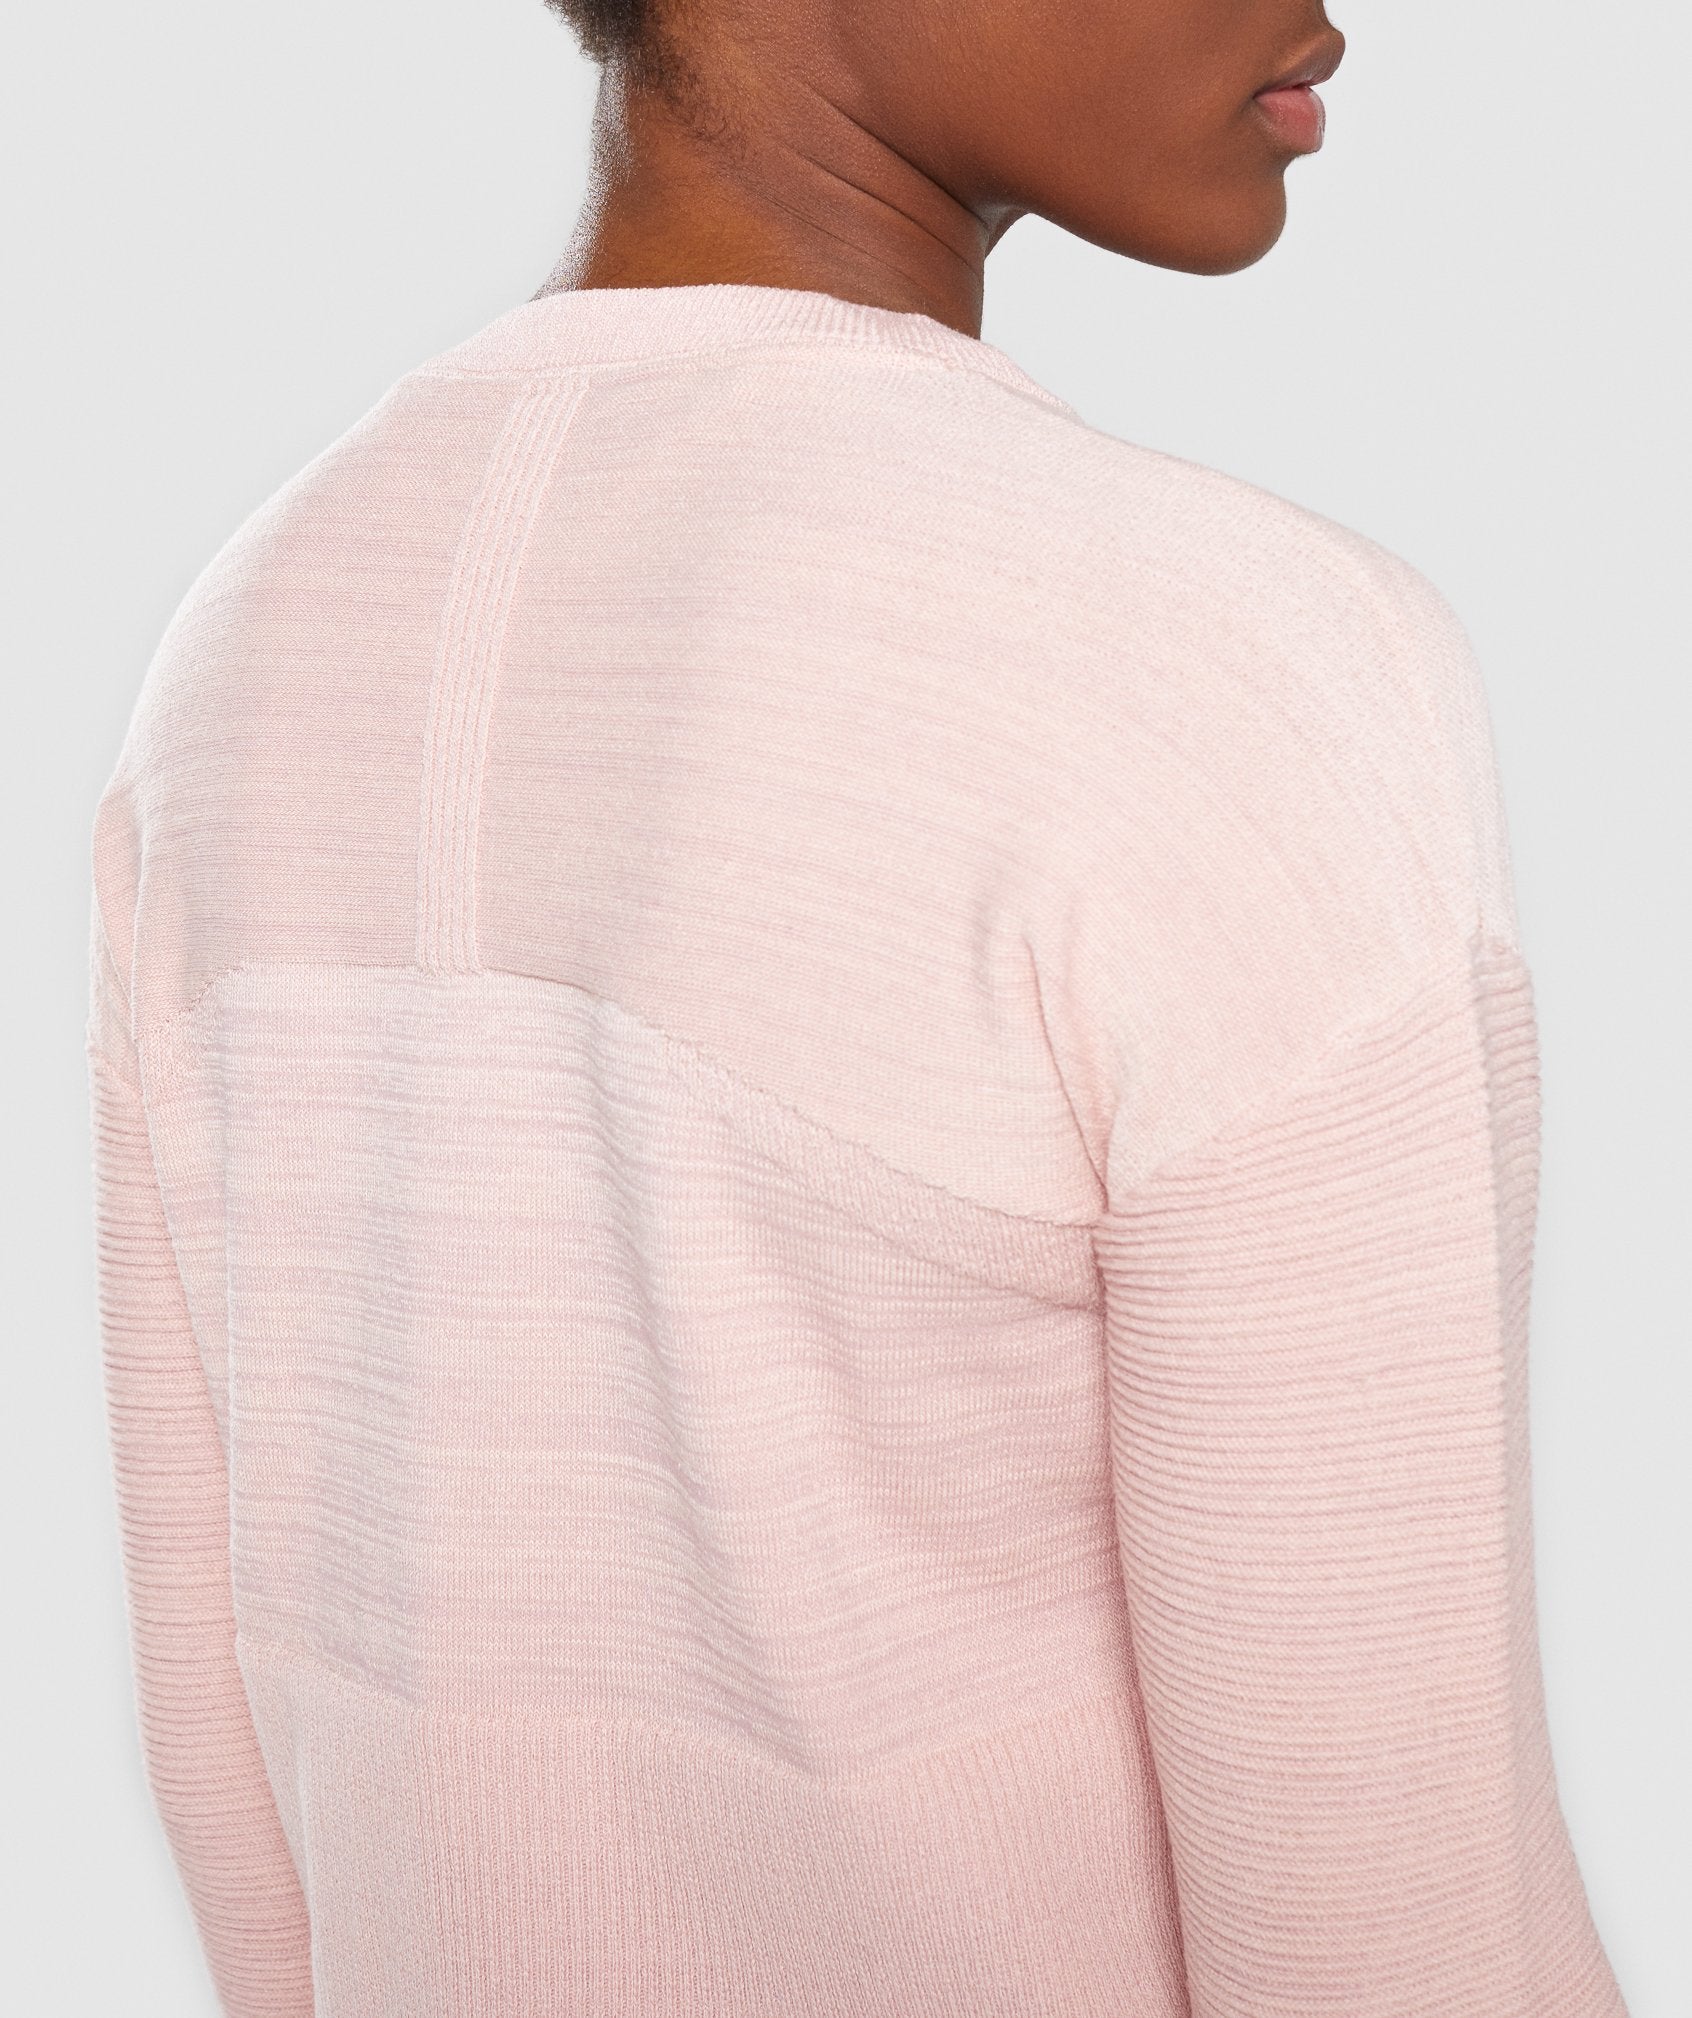 Time Out Knit Sweater in Blush Nude - view 5